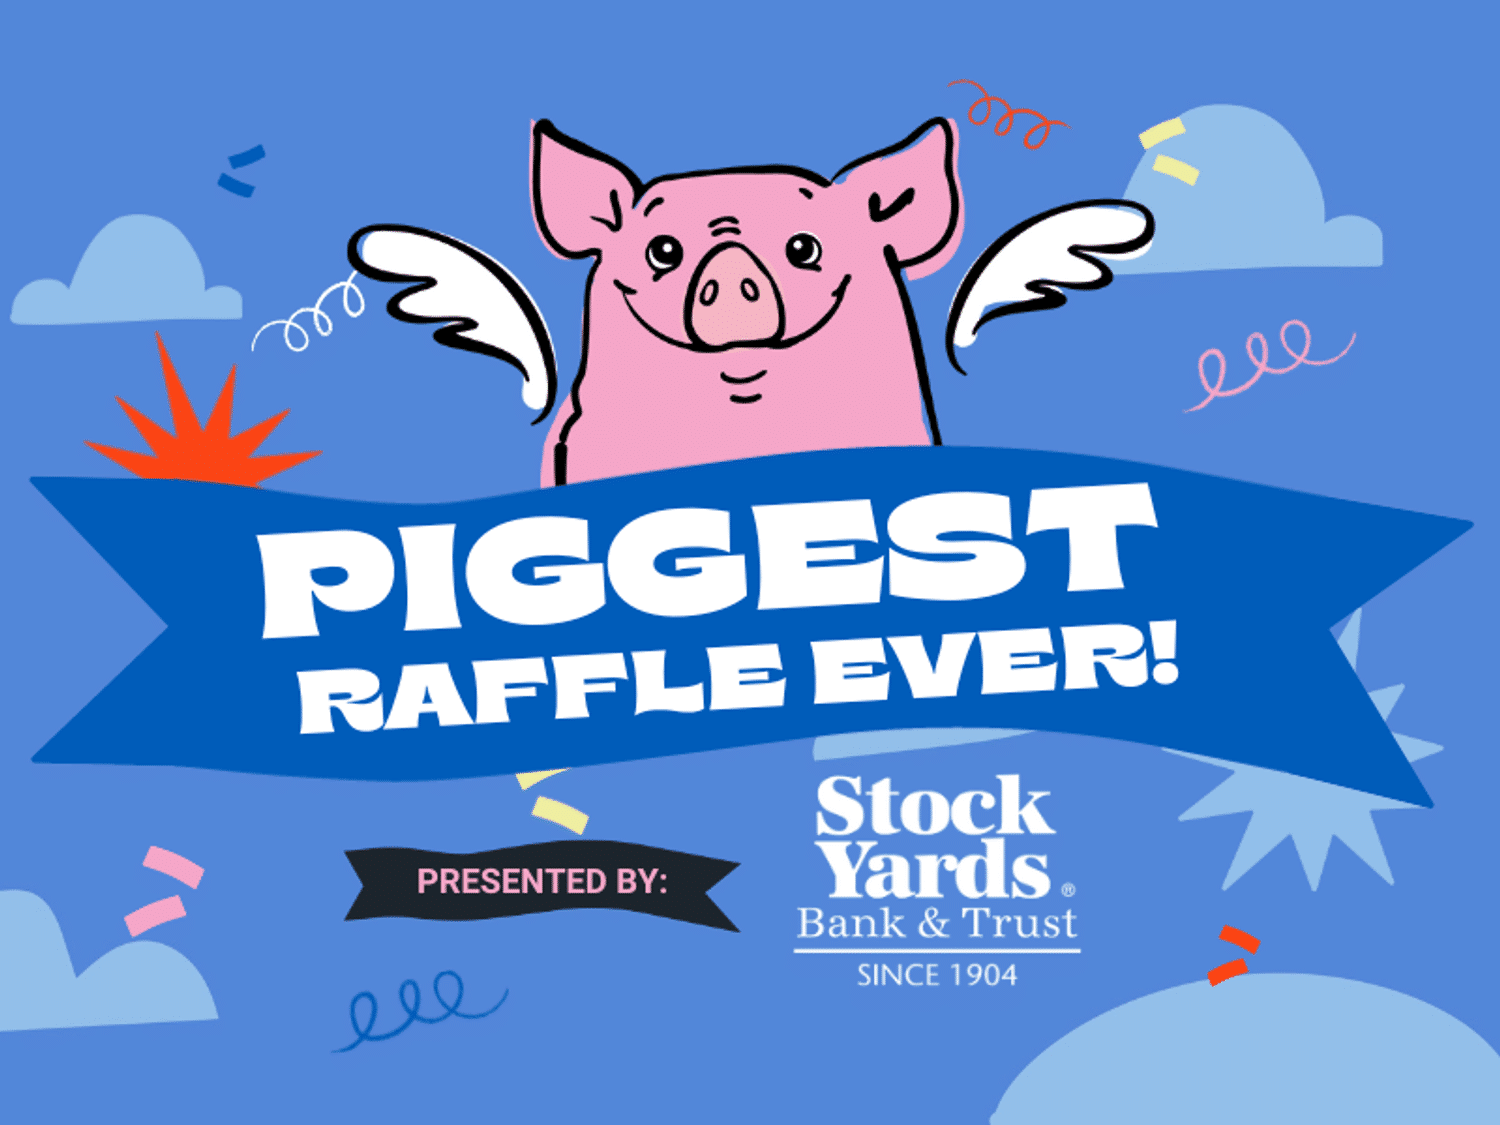 Did you win the Piggest Raffle Ever?